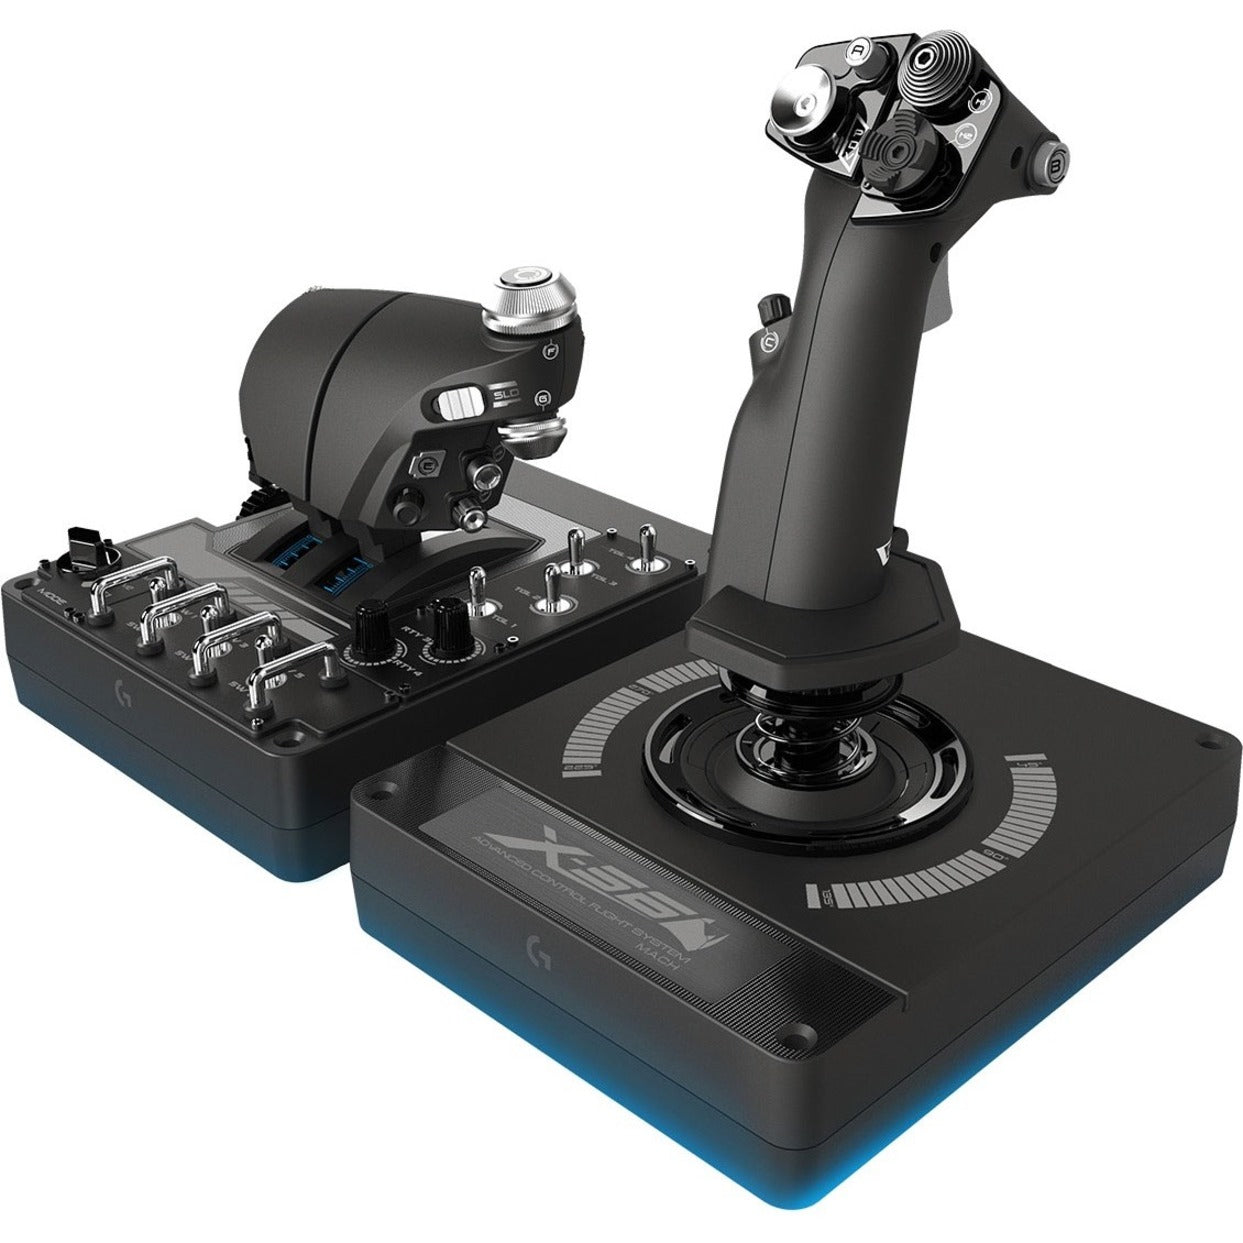 Logitech 945-000058 X56 H.O.T.A.S. RGB Throttle and Stick Simulation Controller, 2 Year Warranty, PC Gaming Throttle